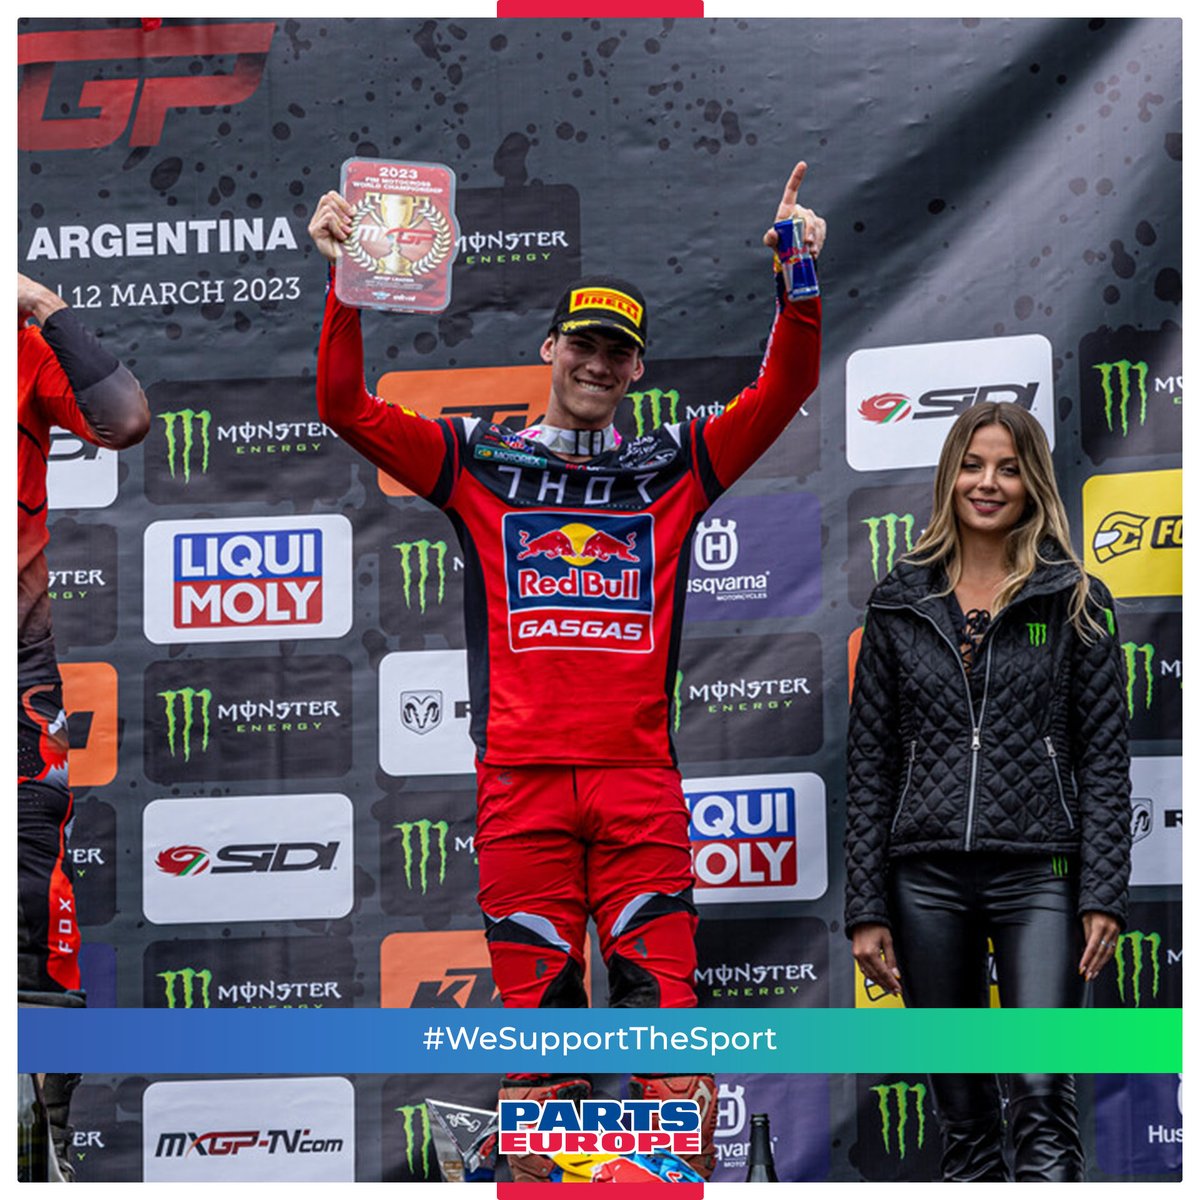 Thor race report: Prado leads MXGP world championship after Argentinian GP.
@ThorMXOfficial
#mxgp #motocross #mxgp2023 #WeSupportTheSport